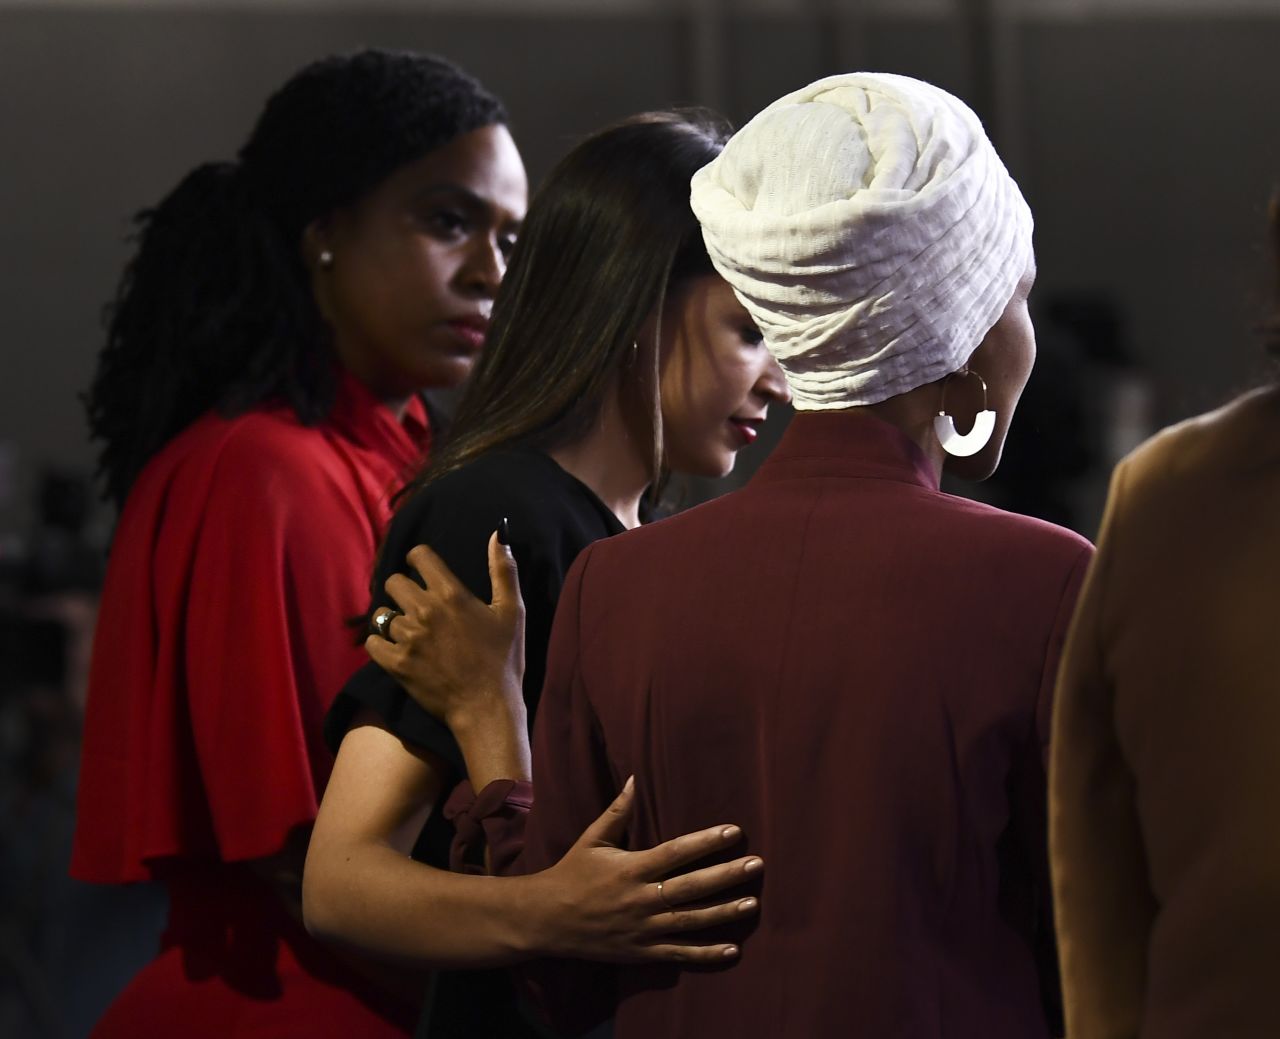 Omar and Ocasio-Cortez embrace during the news conference at the US Capitol. Omar has faced criticism for several comments she has made both before and after she was elected that were condemned by both sides of the aisle as anti-Semitic. Omar has apologized for some of the remarks she's made, but has not shied away from criticizing the actions of the Israeli government, which has made a common target -- not just for the President -- but for Republicans across Capitol Hill. 